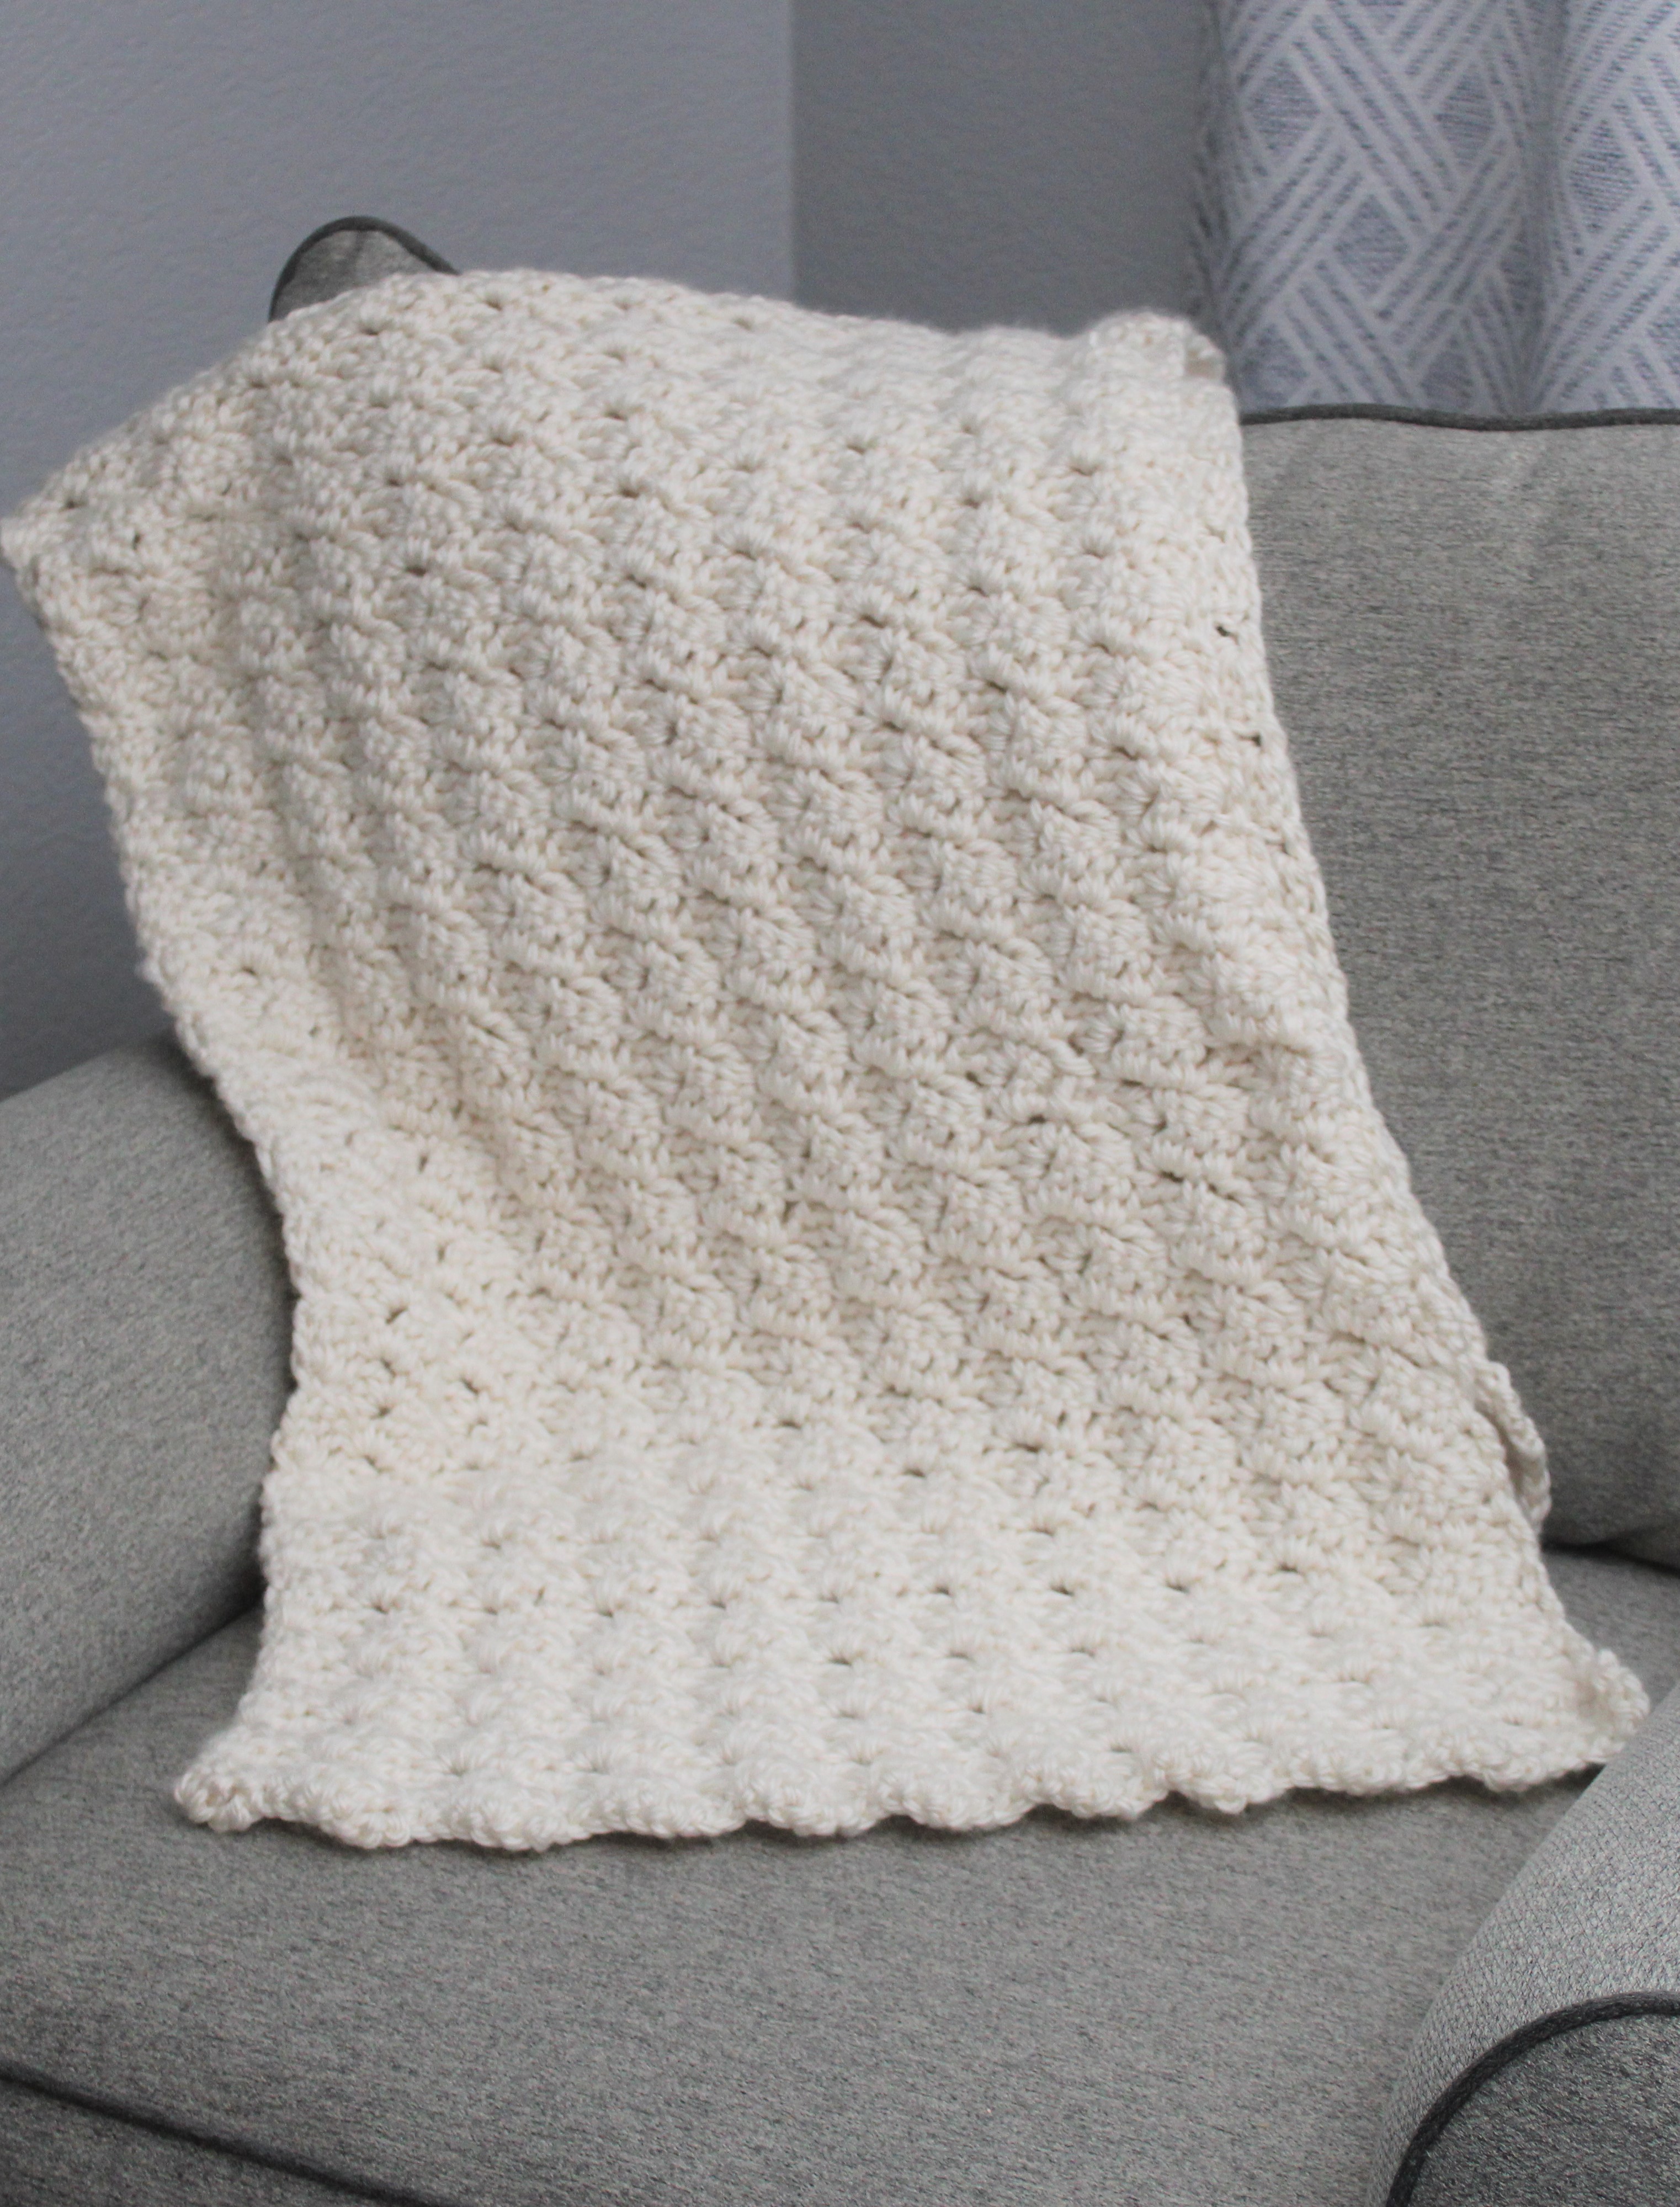 crocheted ivory shawl draped over a chair